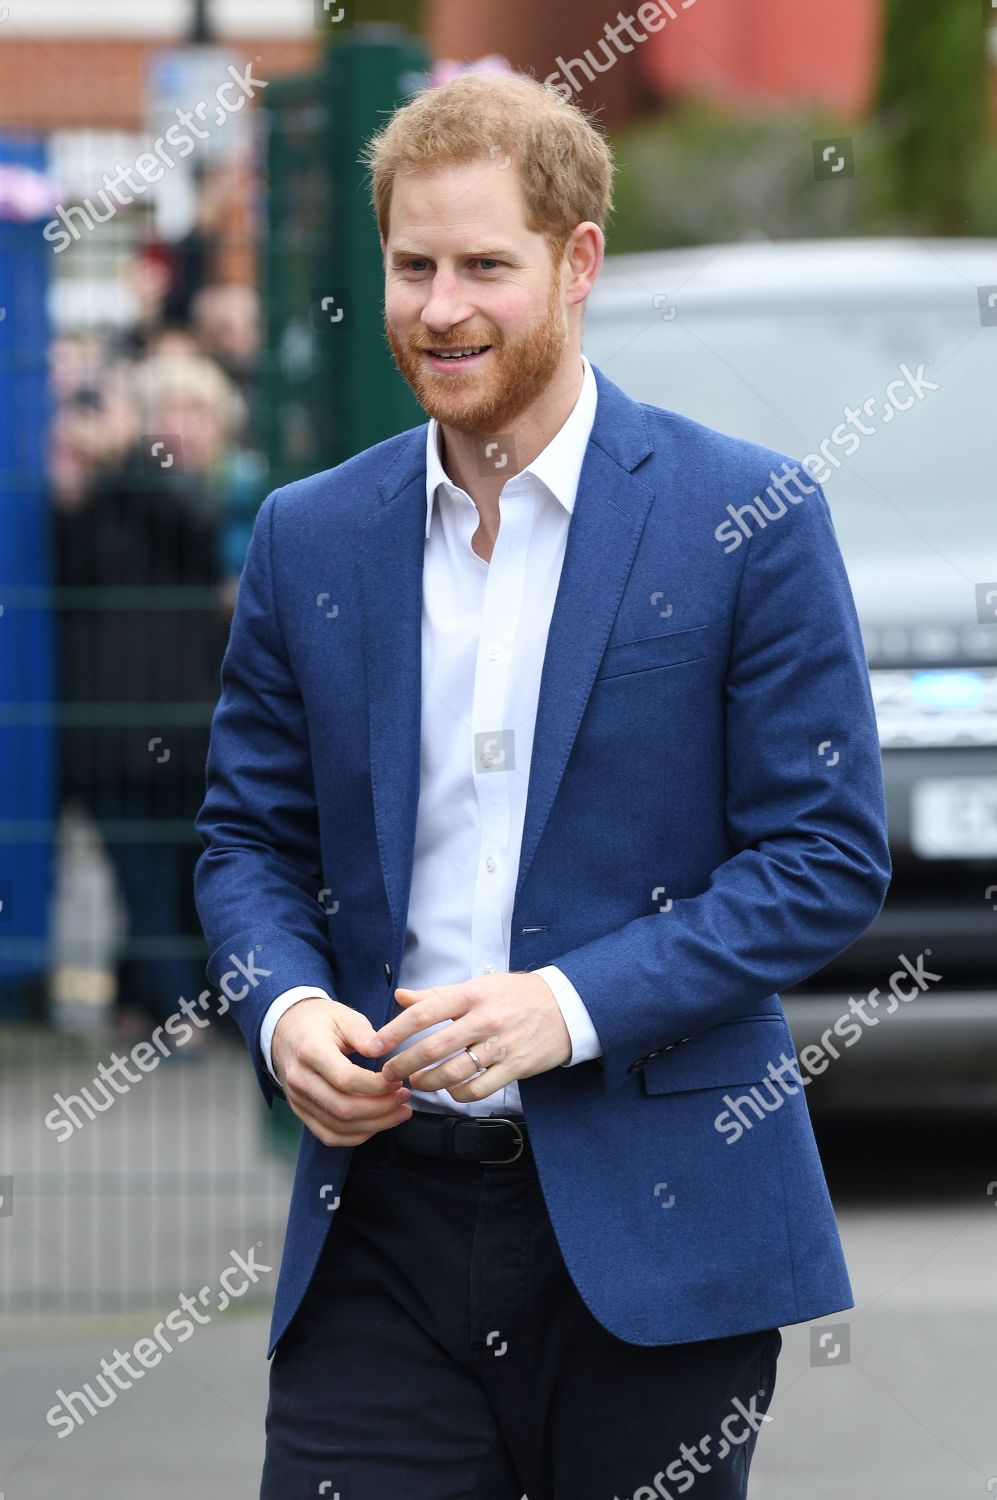 prince-harry-visits-st-vincents-catholic-primary-school-for-commonwealth-canopy-and-woodland-trust-tree-planting-ceremony-london-uk-shutterstock-editorial-10160984g.jpg